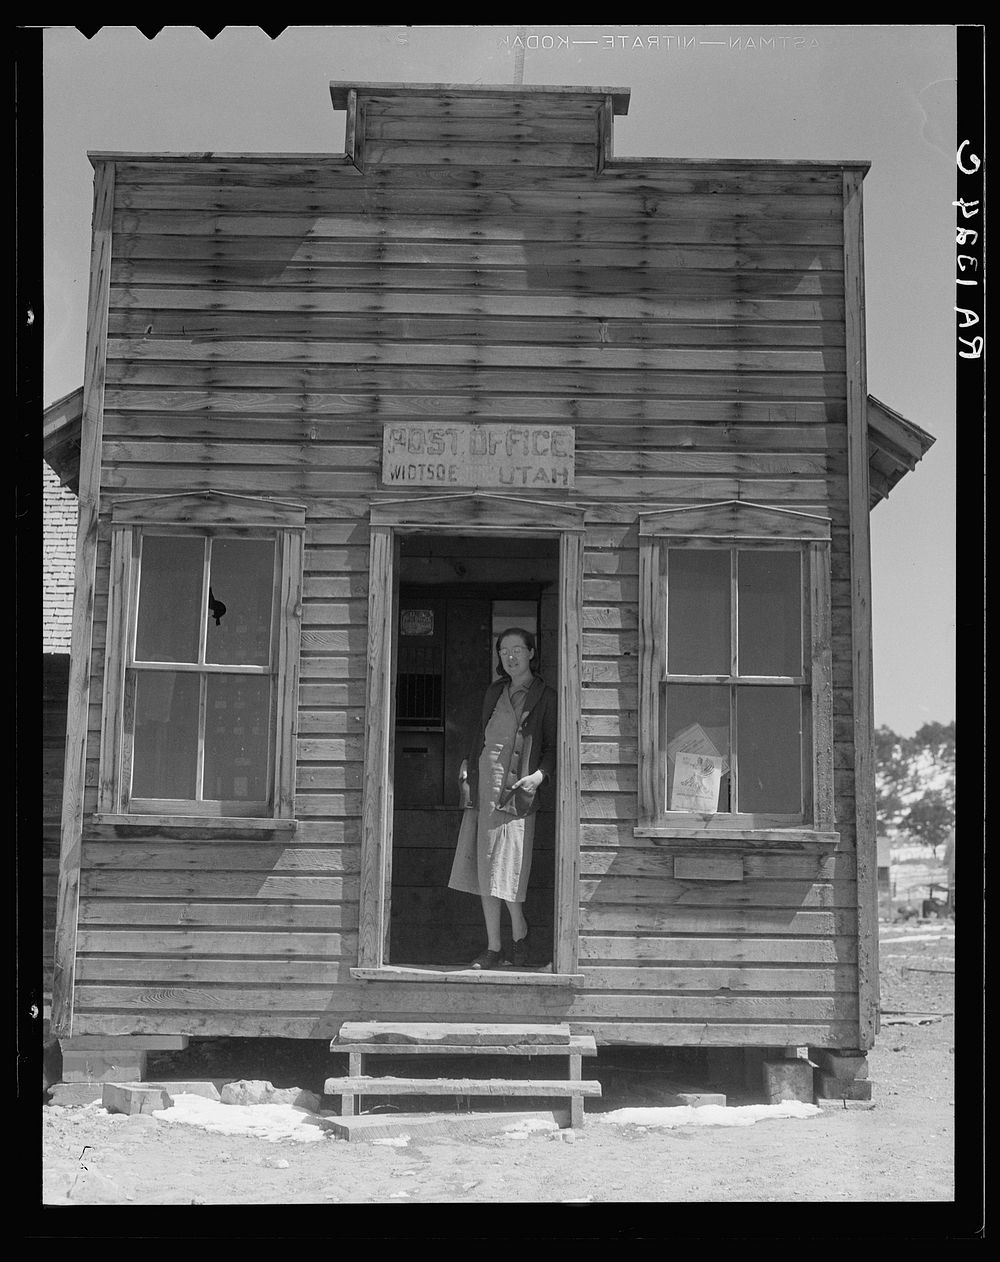 Post office and postmistress, view number two. Widtsoe, Utah. Sourced from the Library of Congress.